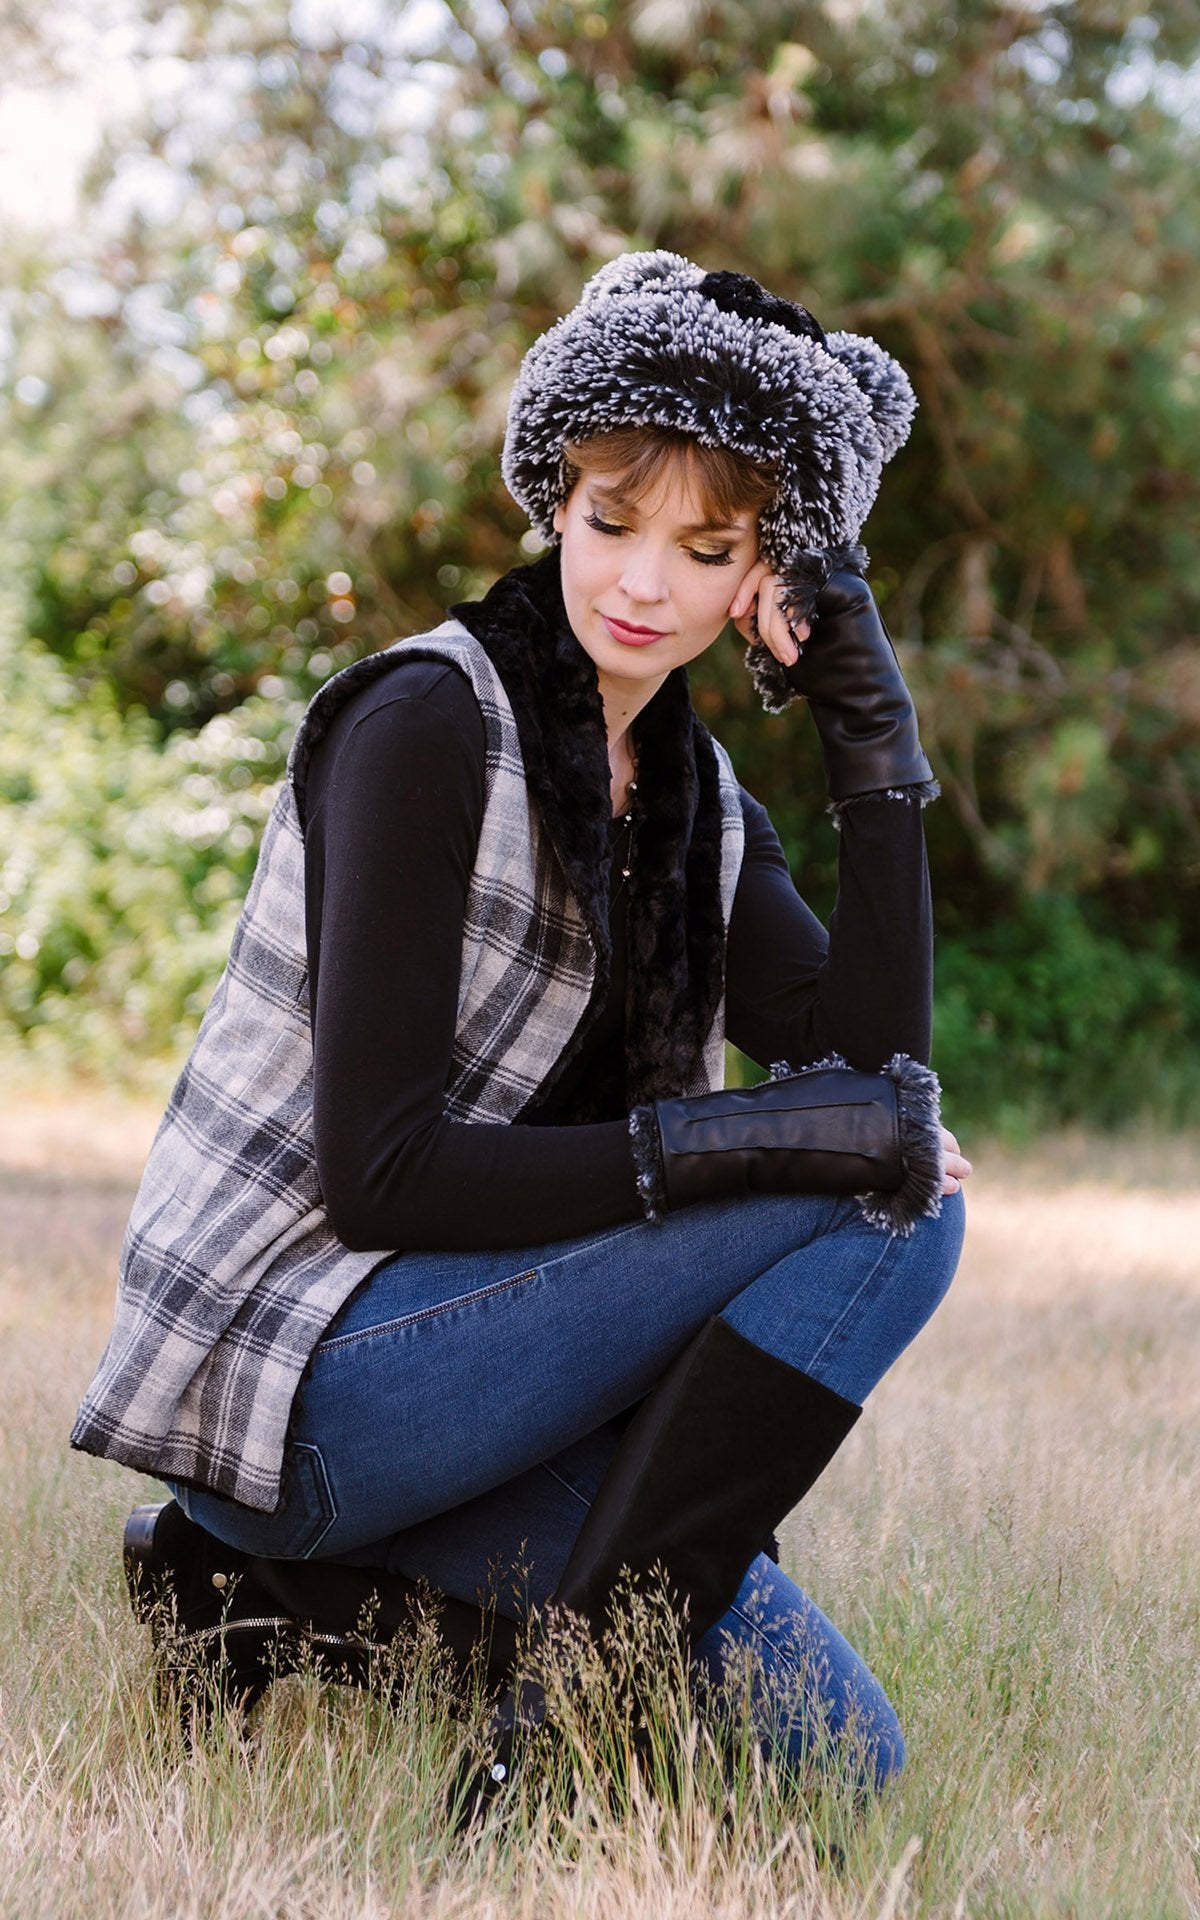 woman wearing Shawl Collar Vest | Twilight Wool Plaid with Cuddly Faux Fur | Handmade in Seattle, WA by Pandemonium Millinery USA